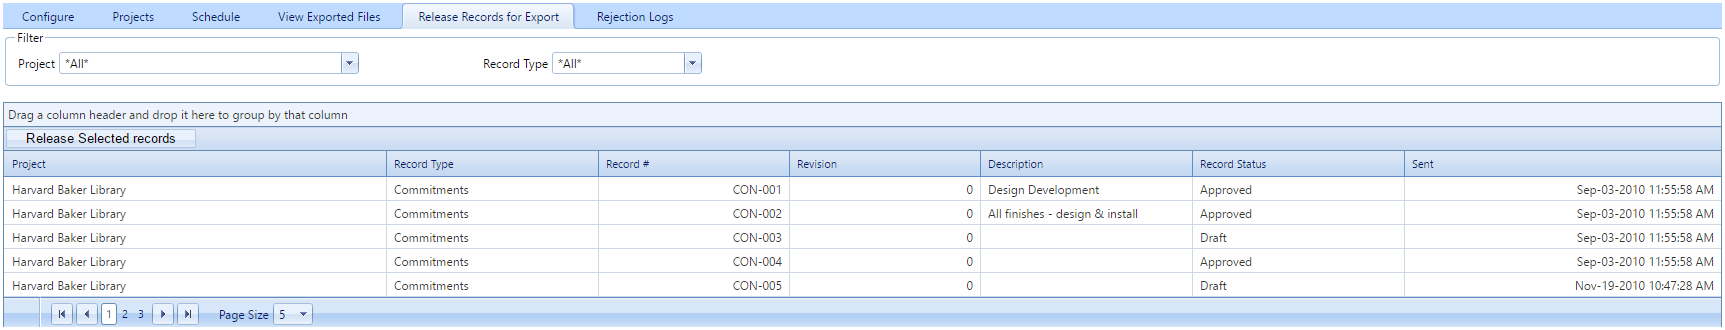 Integration Manager Release Records for Export Tab